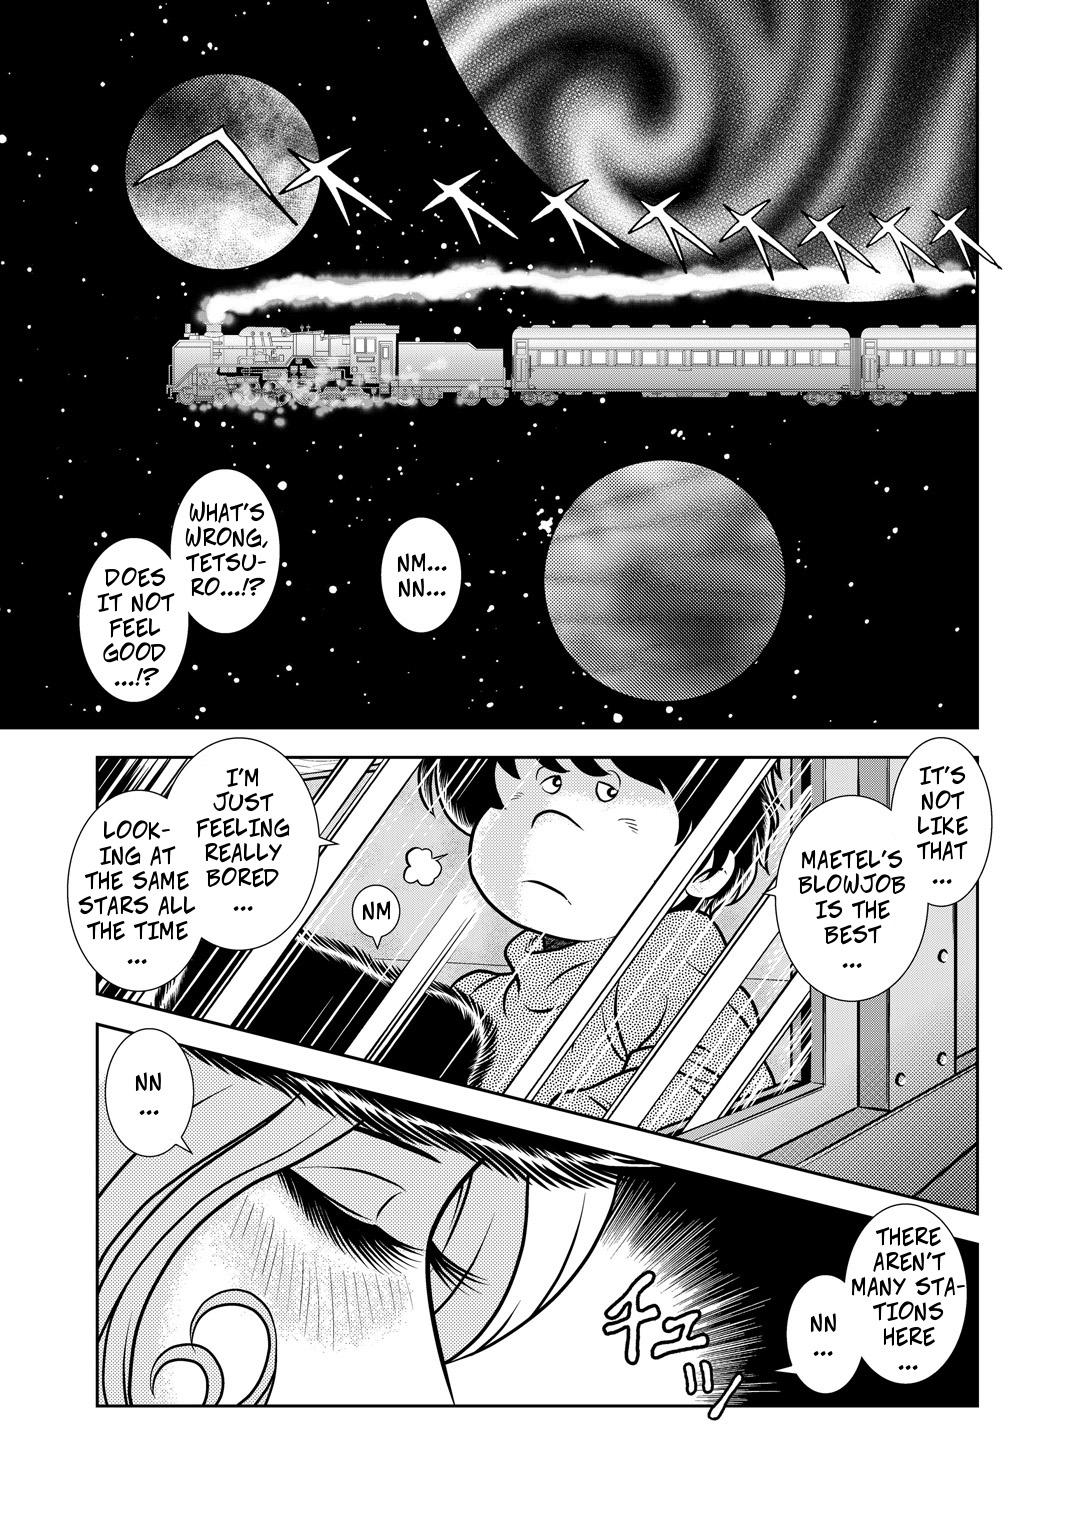 Special Locations Maetel Story 10 - Galaxy express 999 | ginga tetsudou 999 Parody - Page 3